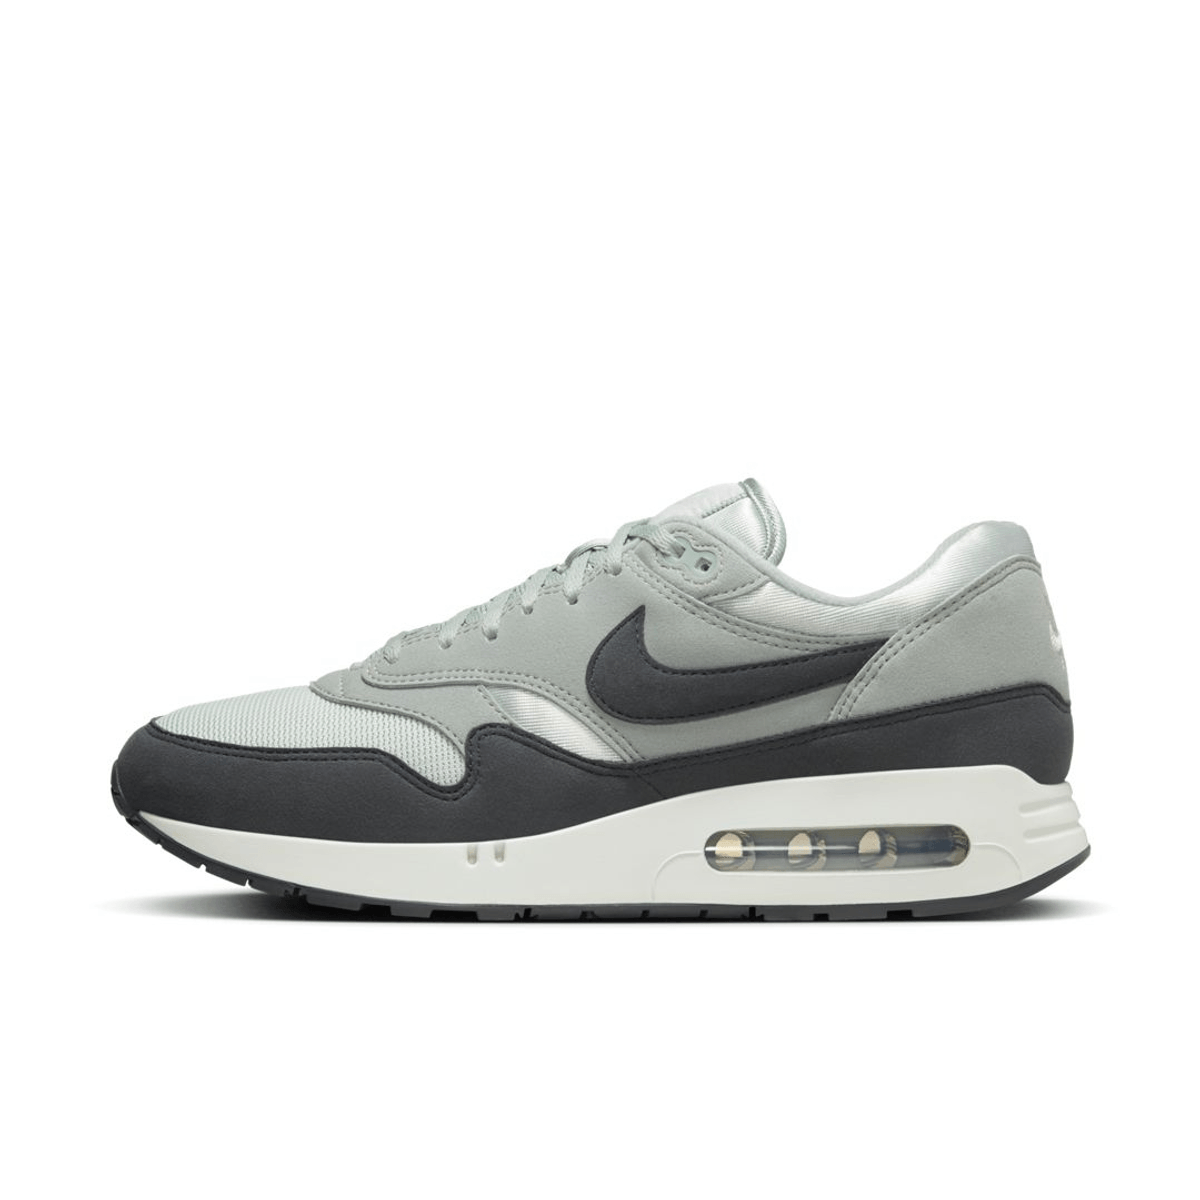 The Big Bubble Is Back On The Air Max 1 86 Light Silver